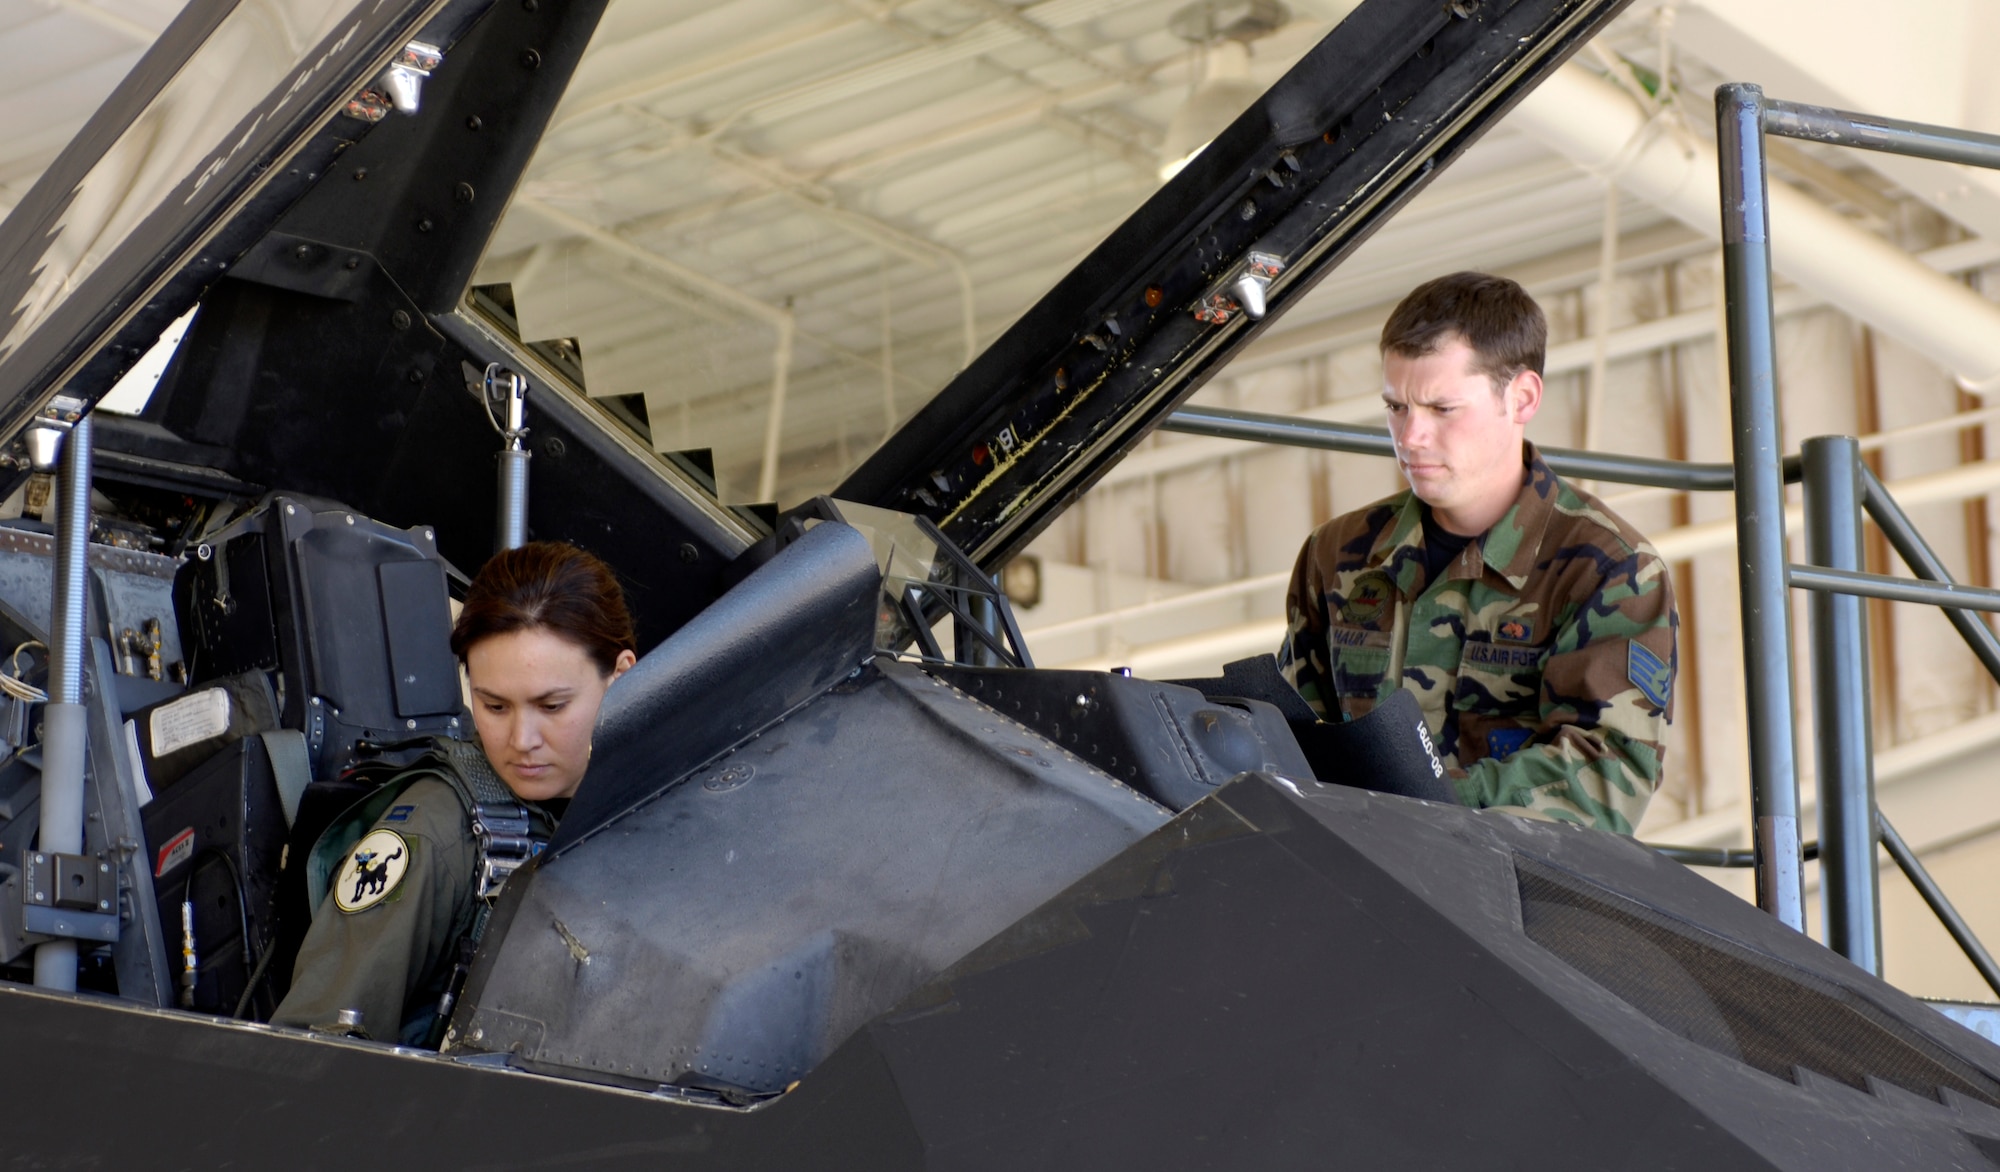 Capt. Christina Szasz prepares an F-117 Nighthawk for takeoff at Holloman Air Force Base, N.M. Oct. 27. The plane was part of a 25-plane formation celebrating the Nighthawk's 25th anniversary and 250,000 flying hour. The planes were separated into five groups and flew over the base to end the celebration ceremony. (U.S. Air Force photo/Senior Airman Brian Ferguson)